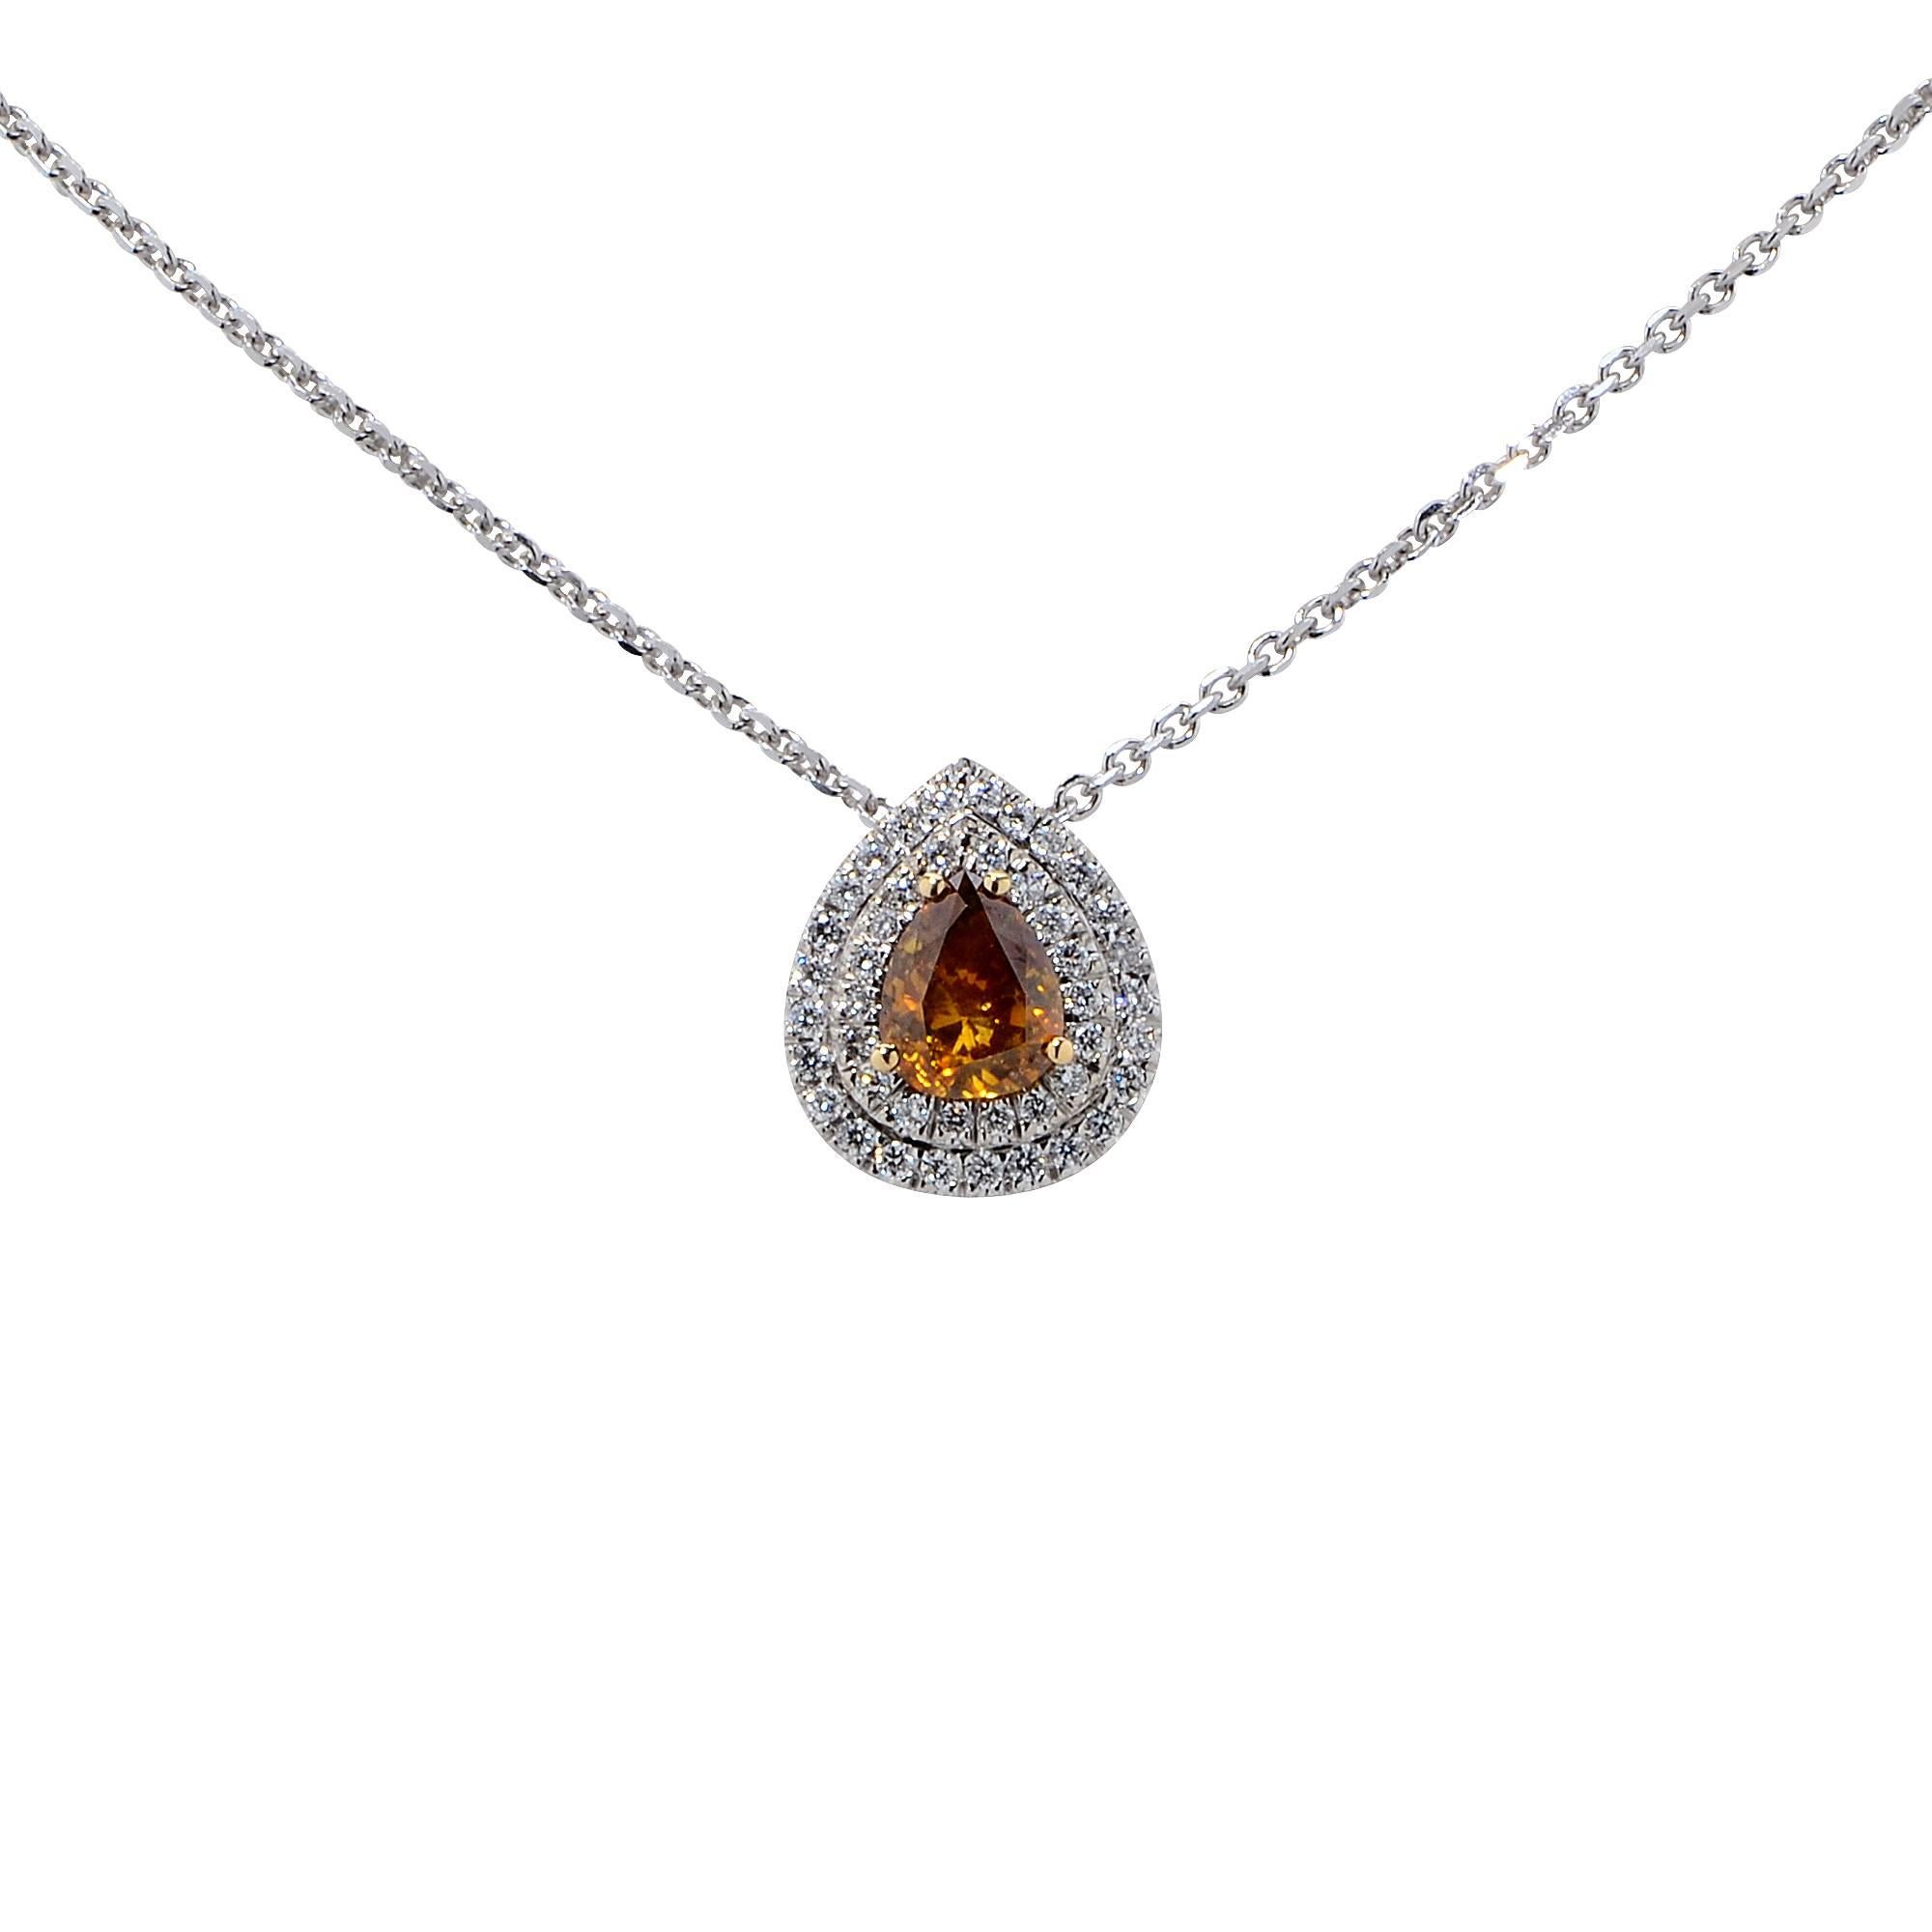 18 Karat White Gold Necklace Featuring a 1.10 Carat Fancy Deep Brownish Orangey Yellow Pear Shape Diamond Accented by .33 Carats of Round Brilliant Cut Diamonds, G Color, VS Clarity.

Weight: 3.91 grams

This Necklace is Accompanied by a GIA